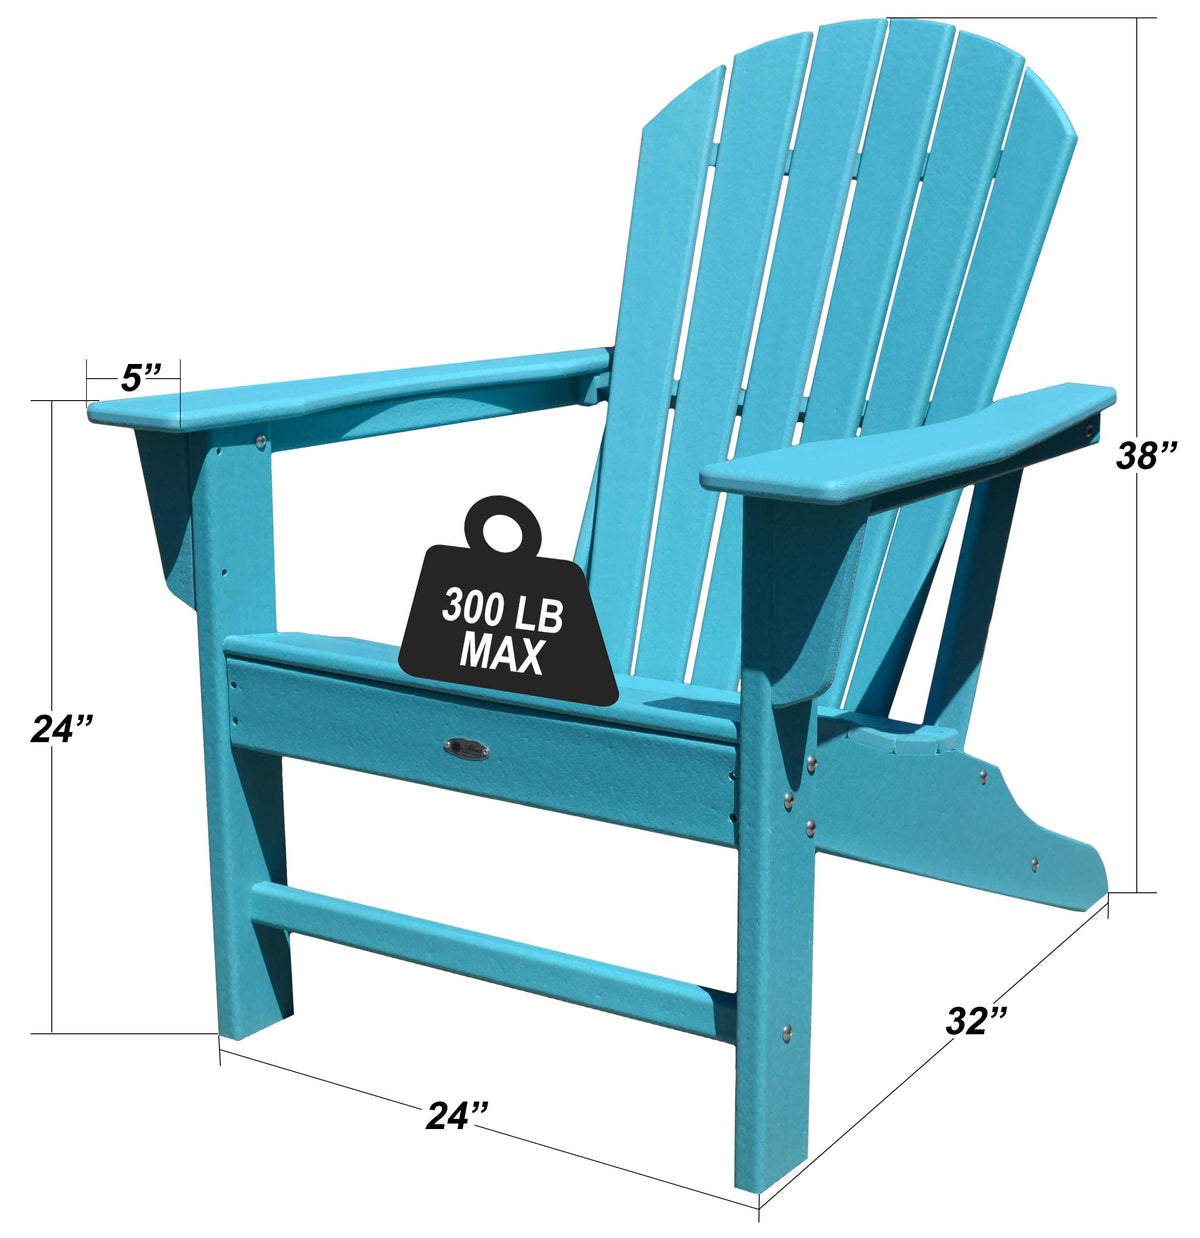 Adirondack Chair by Atlas, Surf City - Dimensions